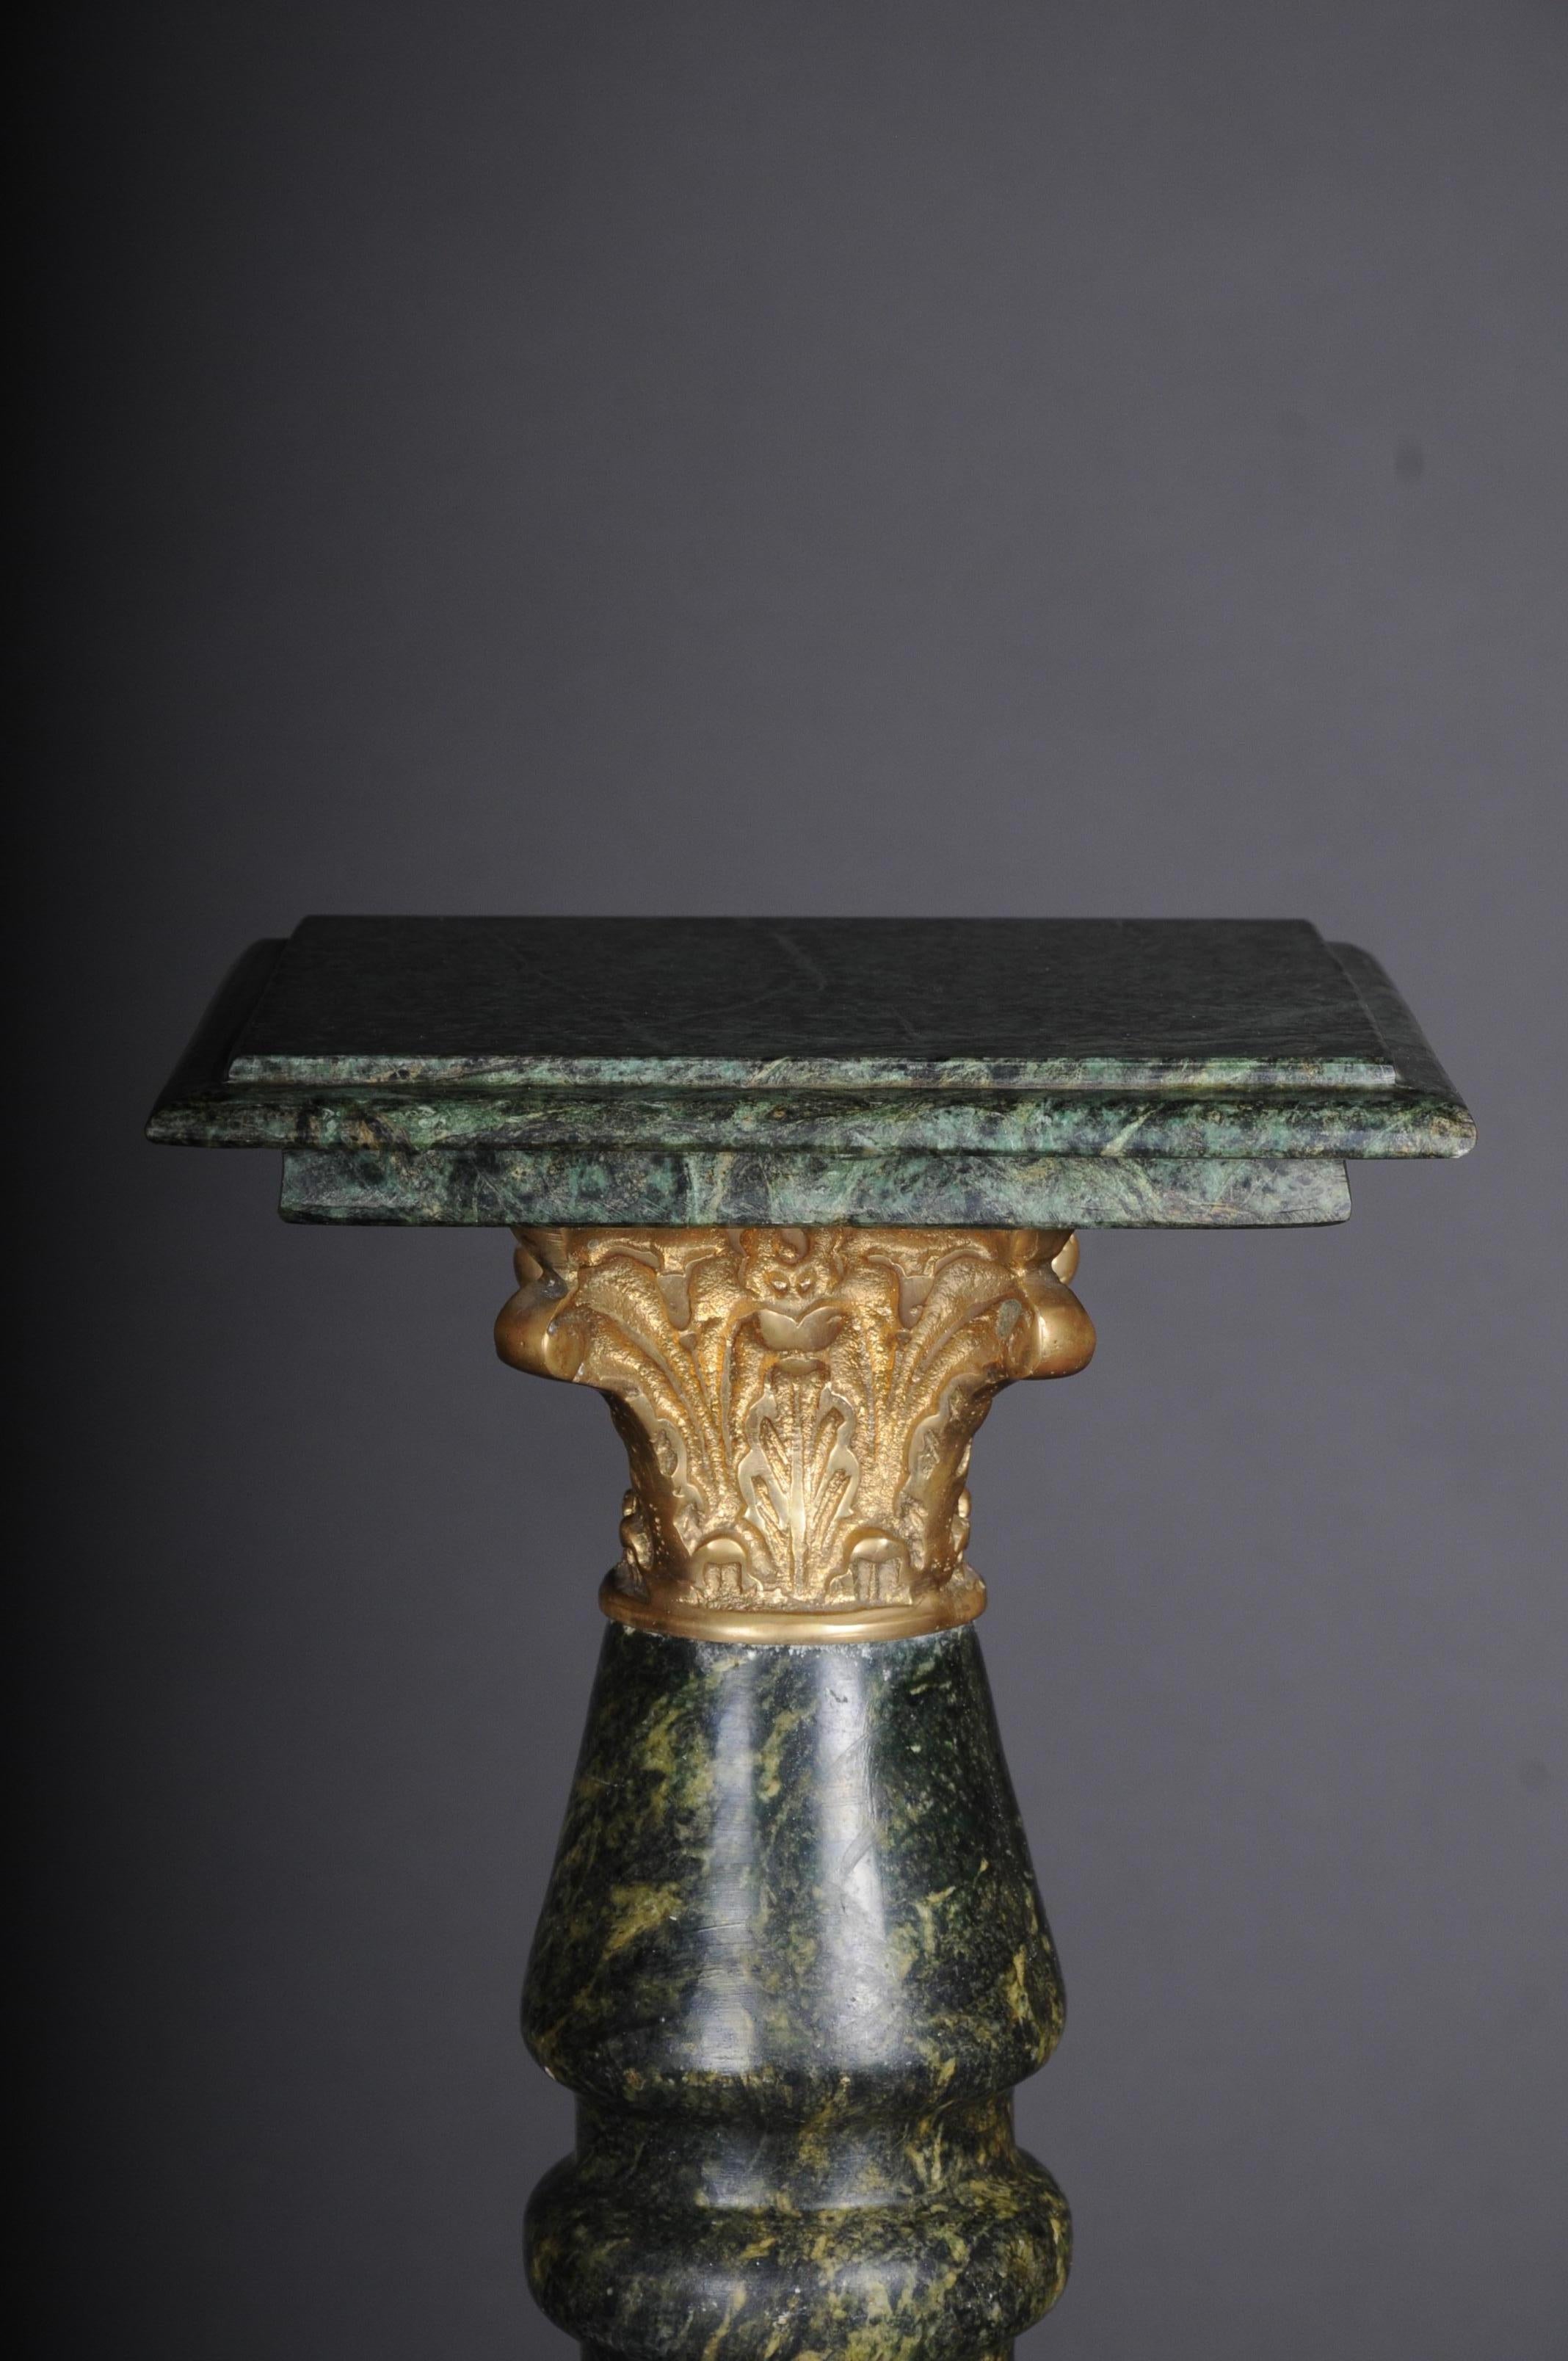 20th century marble pillar/column in Louis XV style
Green marble with bronze bases and capitals. Rectangular, profiled cover plate. Partially turned column shaft
Extremely decorative.

(U-Hud-3).
         